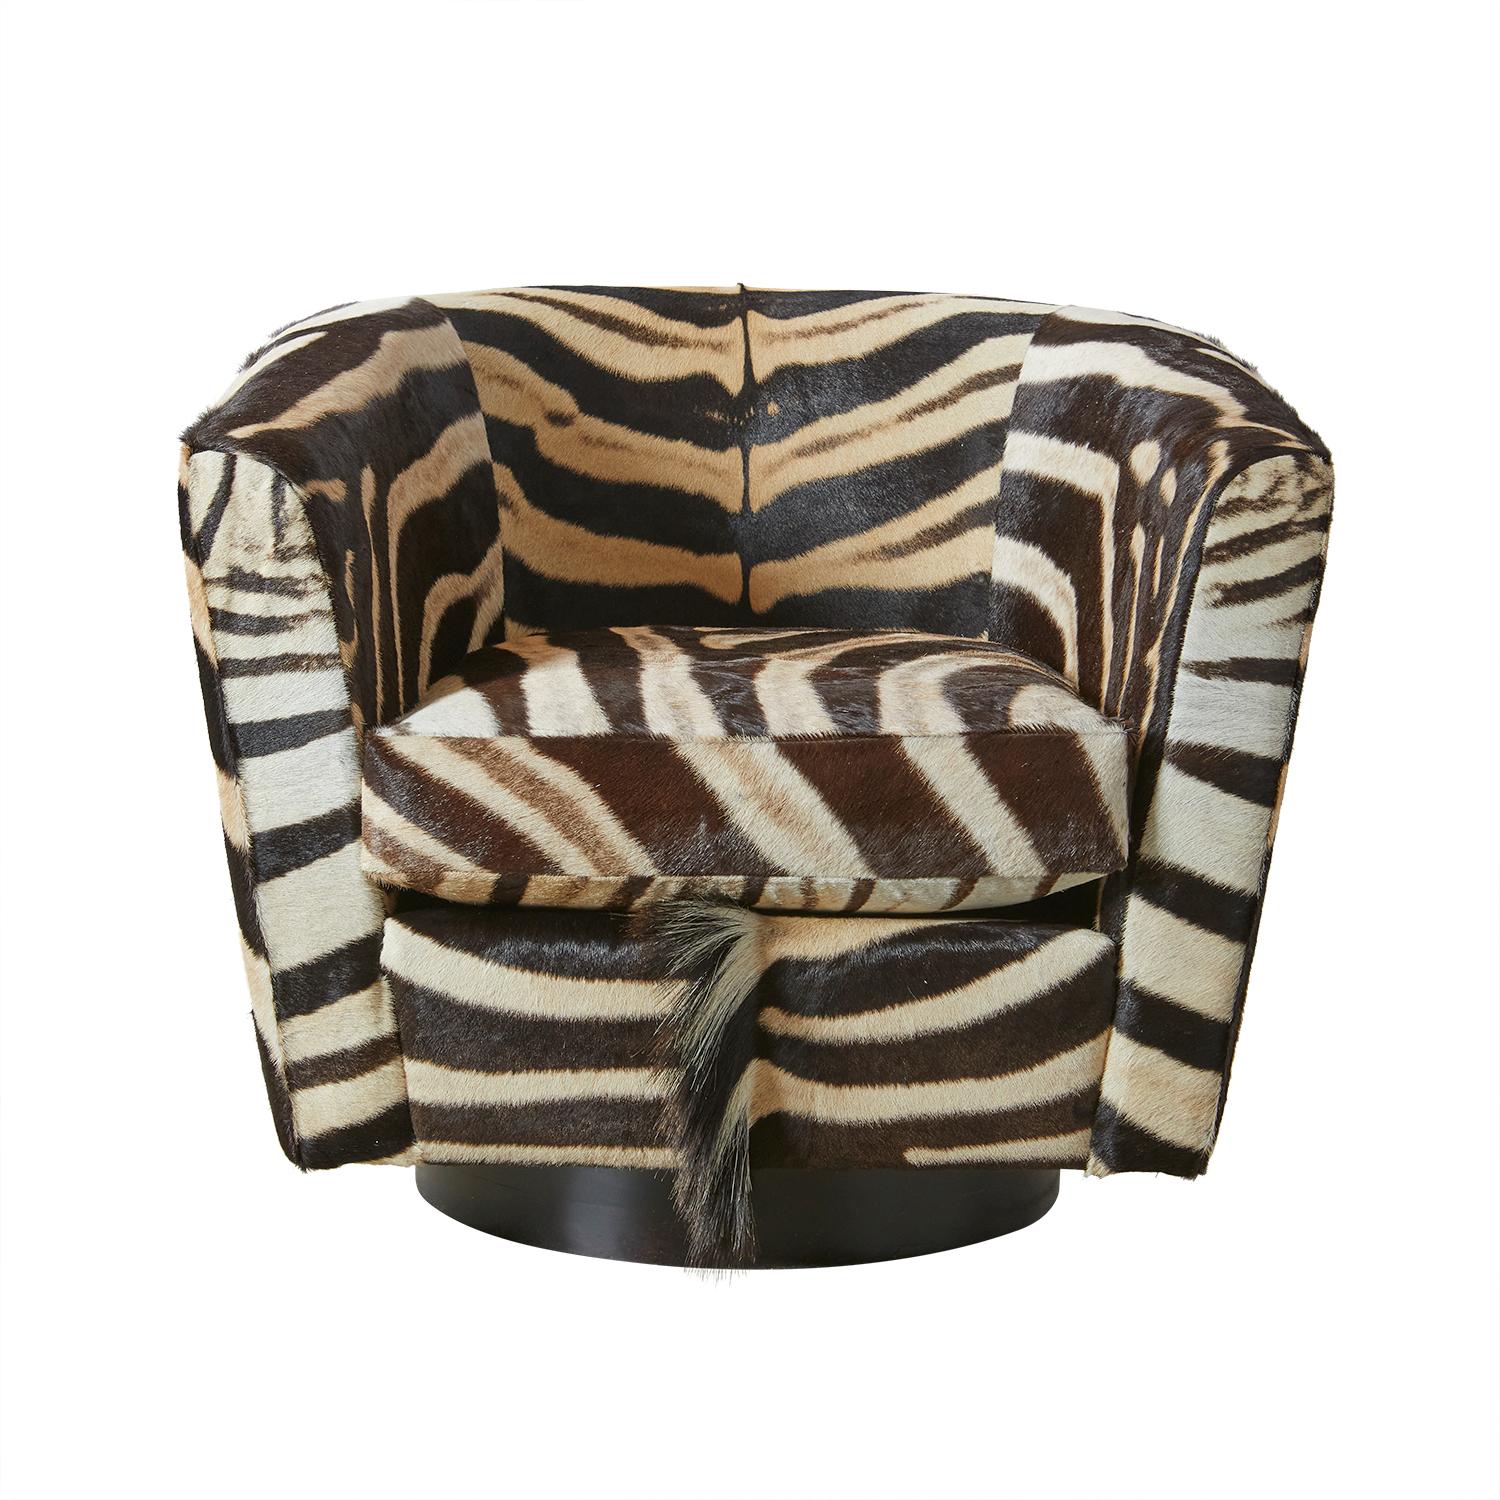 Genuine zebra hide creates an occasional chair sure to make a statement. Each chair requires two full hides to upholster and manufacture making every chair one-of-a-kind. Due to the use of natural materials, each piece is unique and may vary